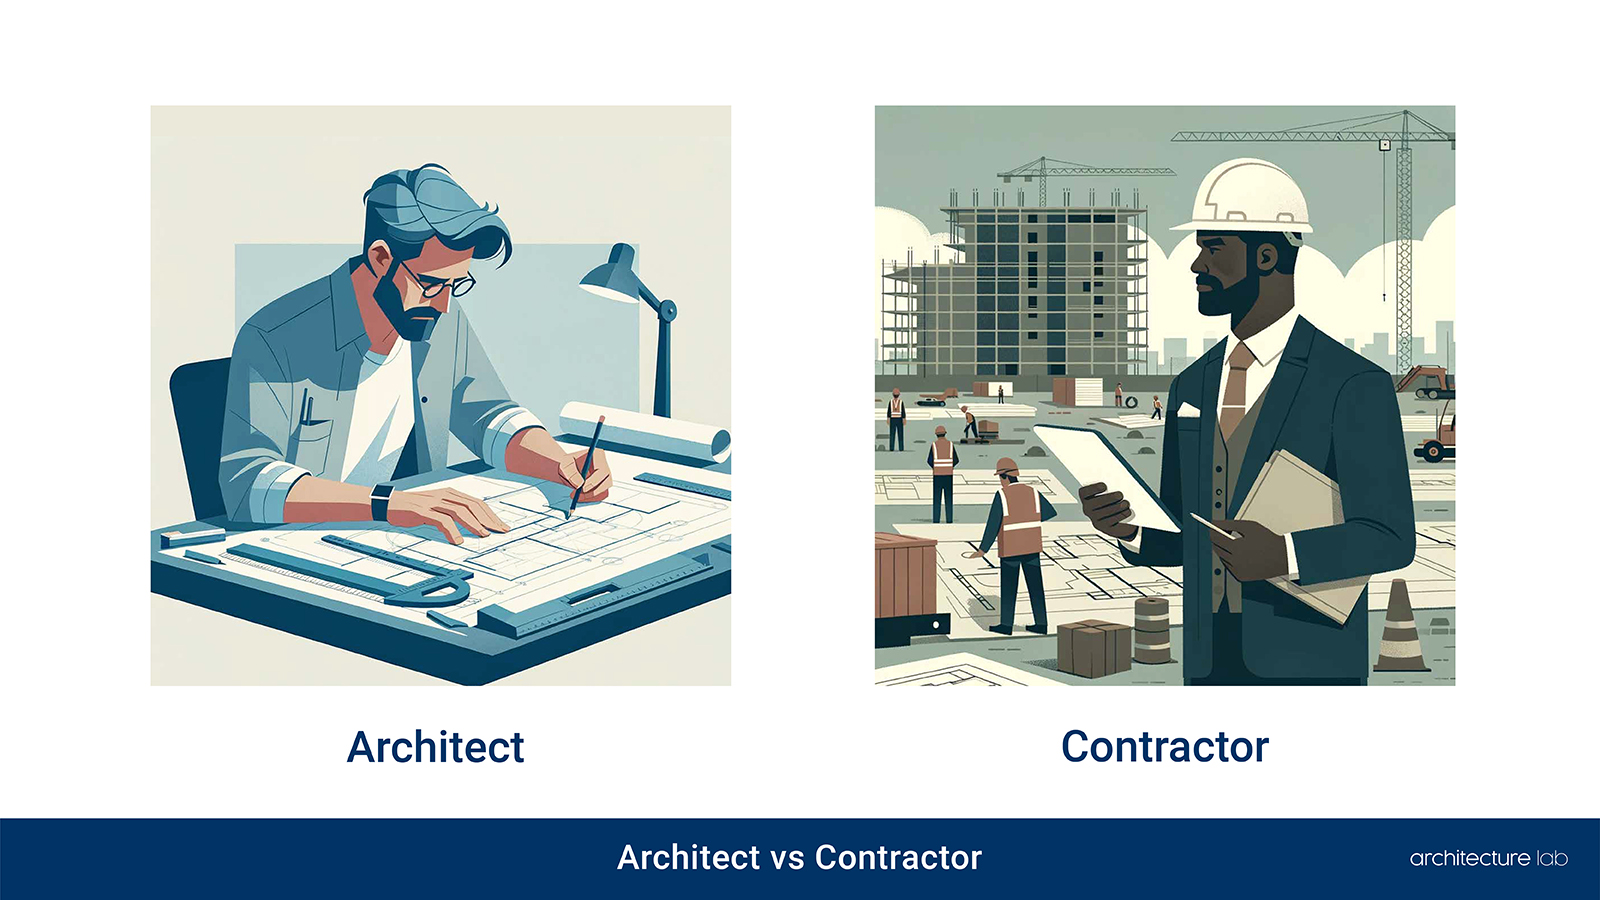 Architect vs contractor: differences, similarities, duties, salaries, and education